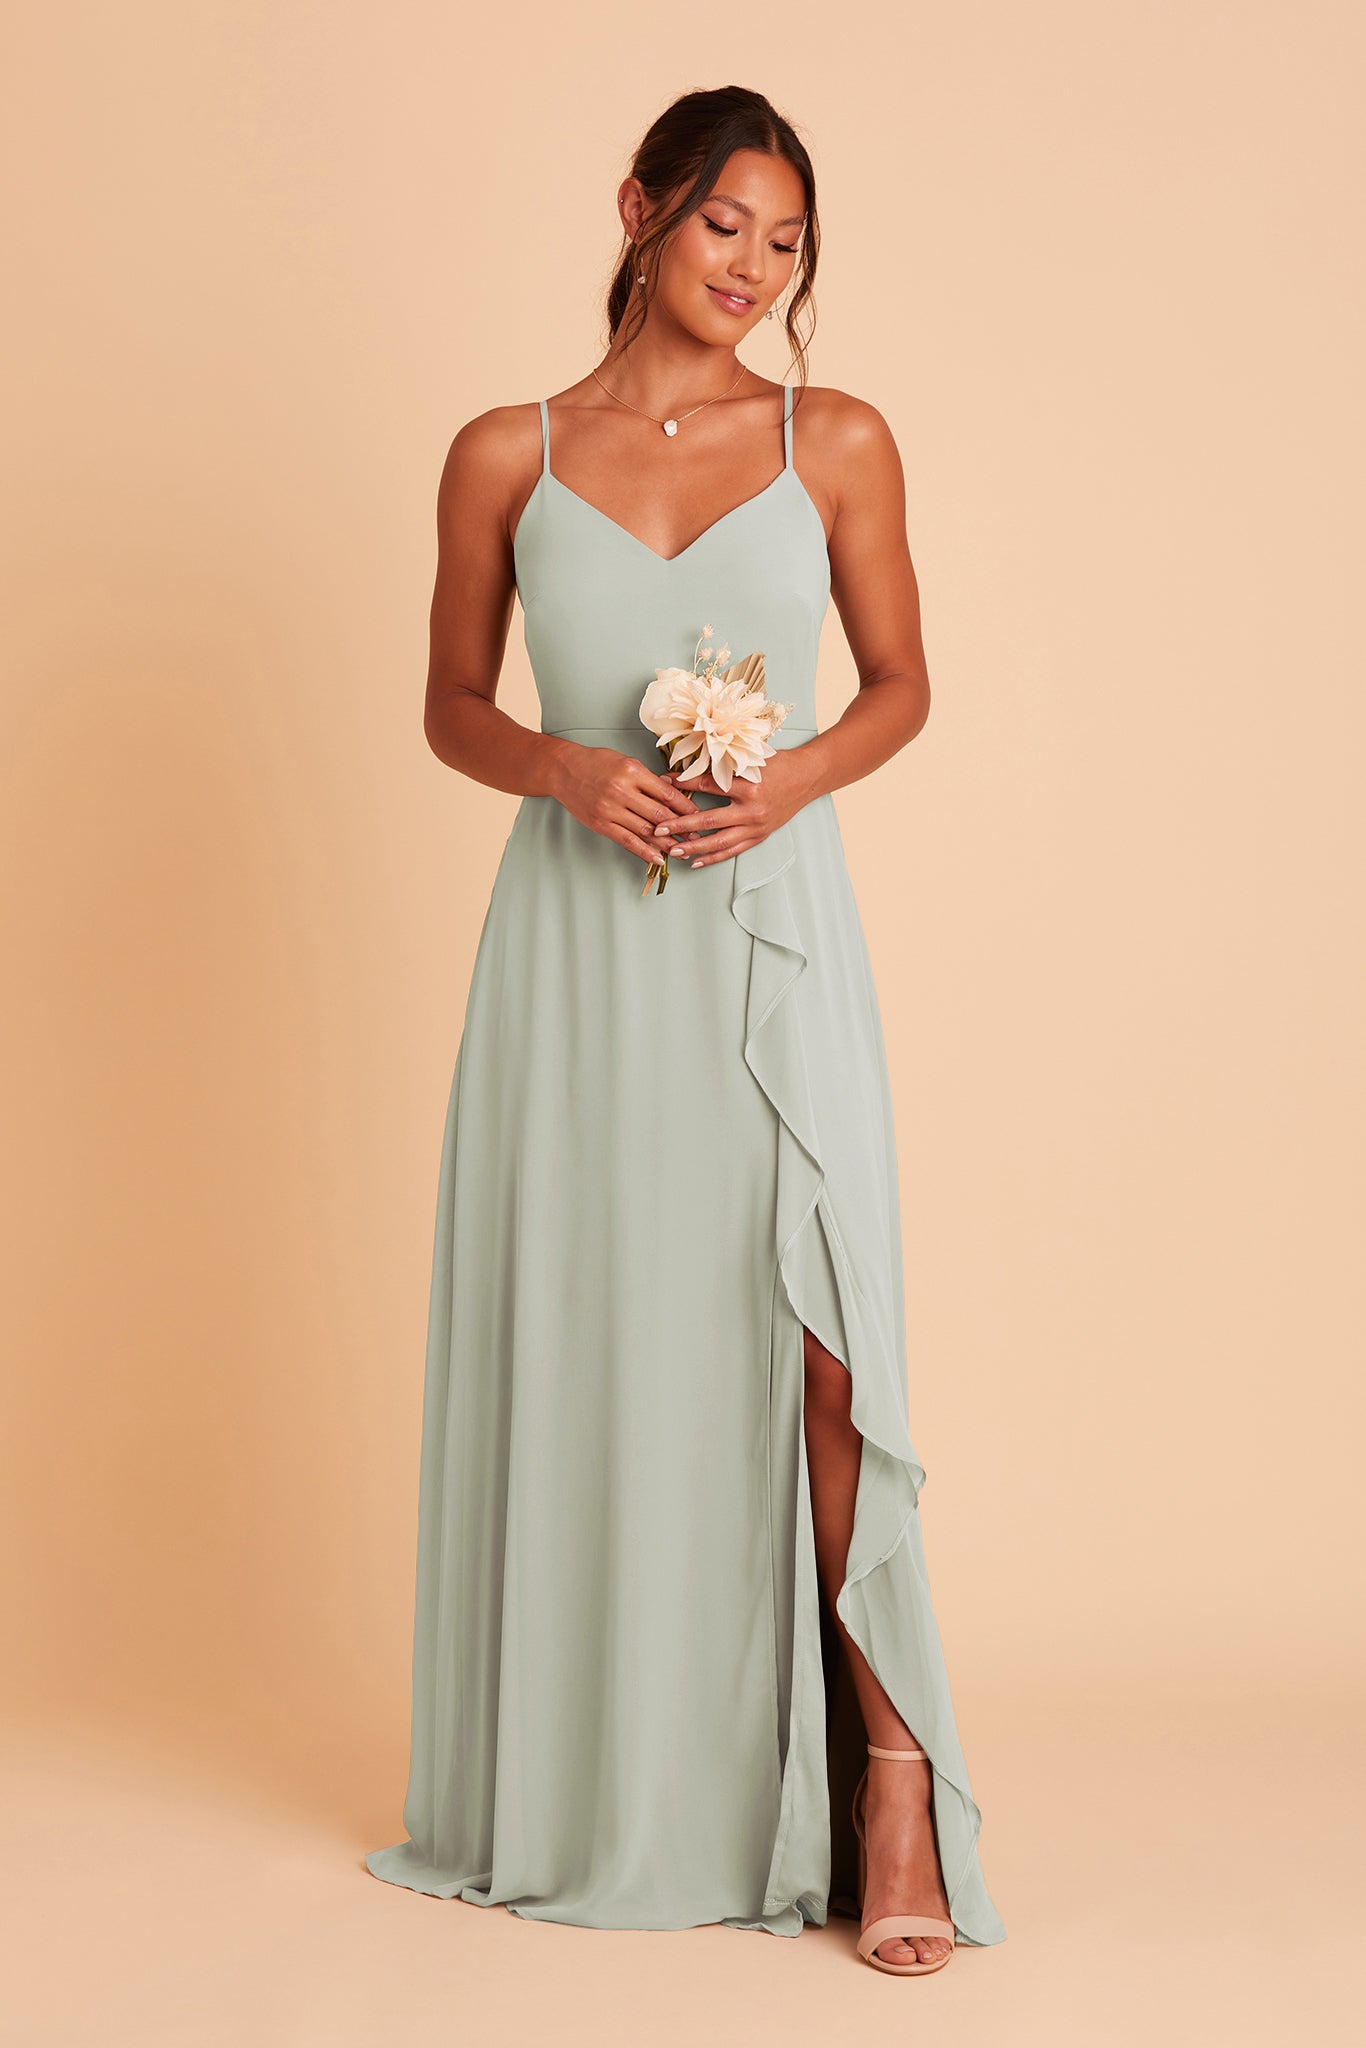 Front view of the Theresa Dress in sage chiffon with the optional slit shows a model holding a dried flower bouquet in ivory at waist height above the sweeping column skirt and slit ruffle. The model reveals her lower leg through the slit and wears the Mary High Chunky Heel shoe. 